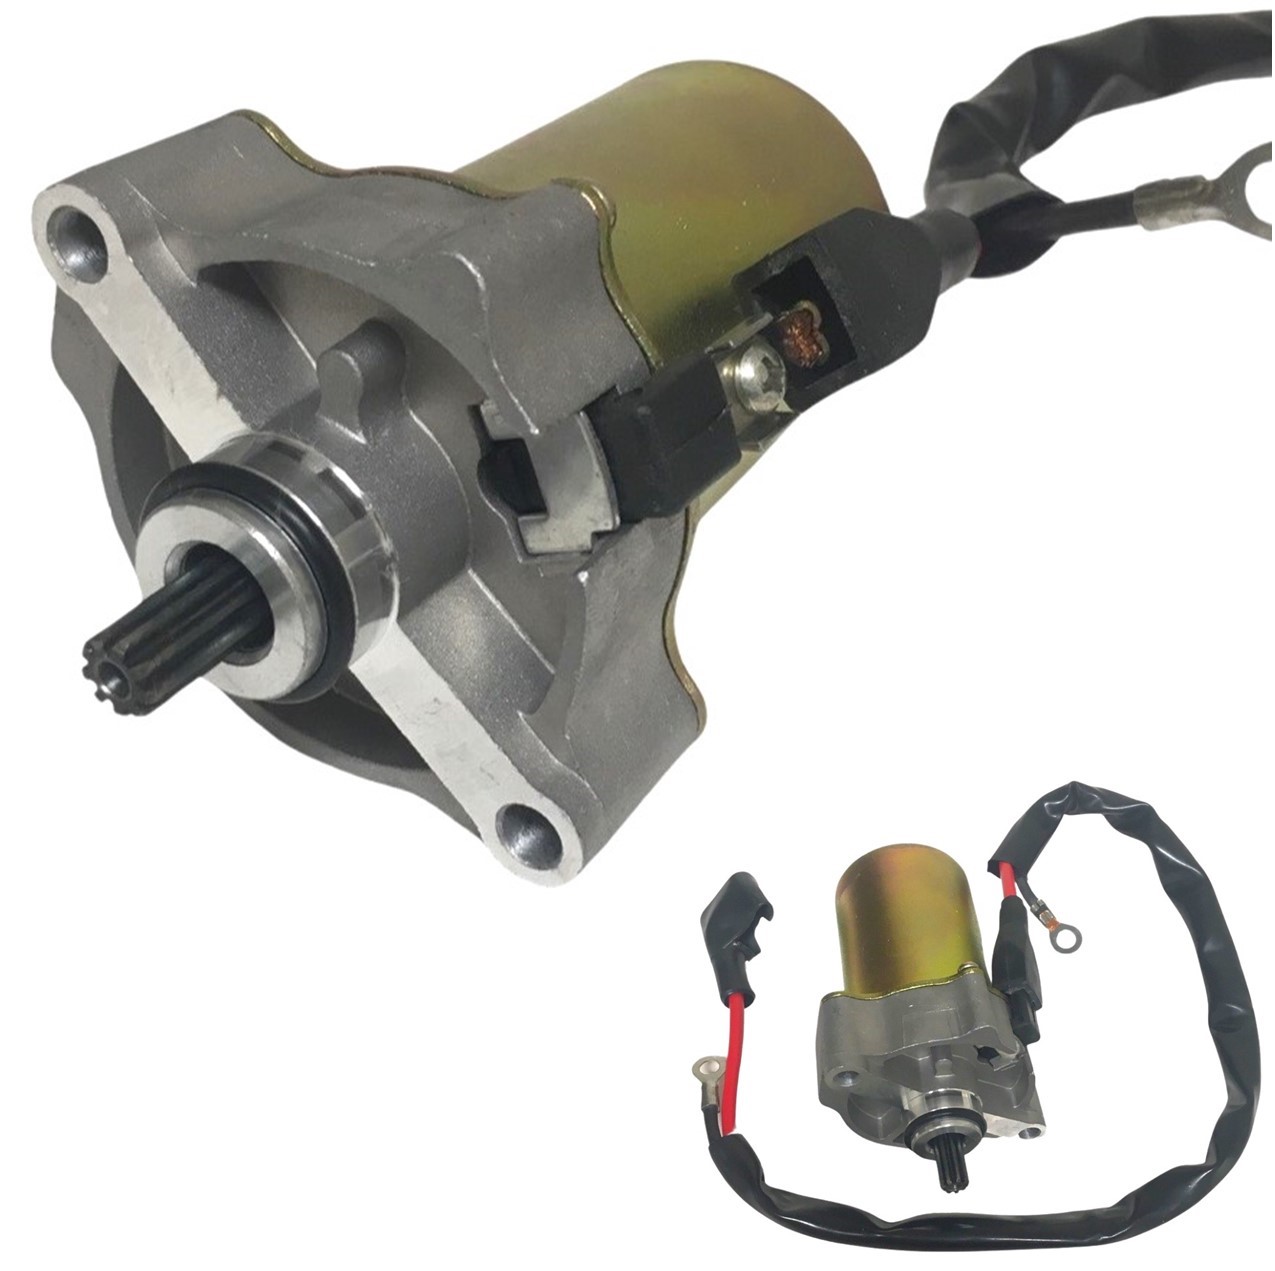 Electric Starter Motor Fits E-Ton Viper RXL70, RXL90R, Viper RX4-70, RX4-90, RX4-90R, Rover UK1, Rover GT, Yamaha Raptor 90 09-13 + more 4 stroke 70-90cc ATVs - Click Image to Close